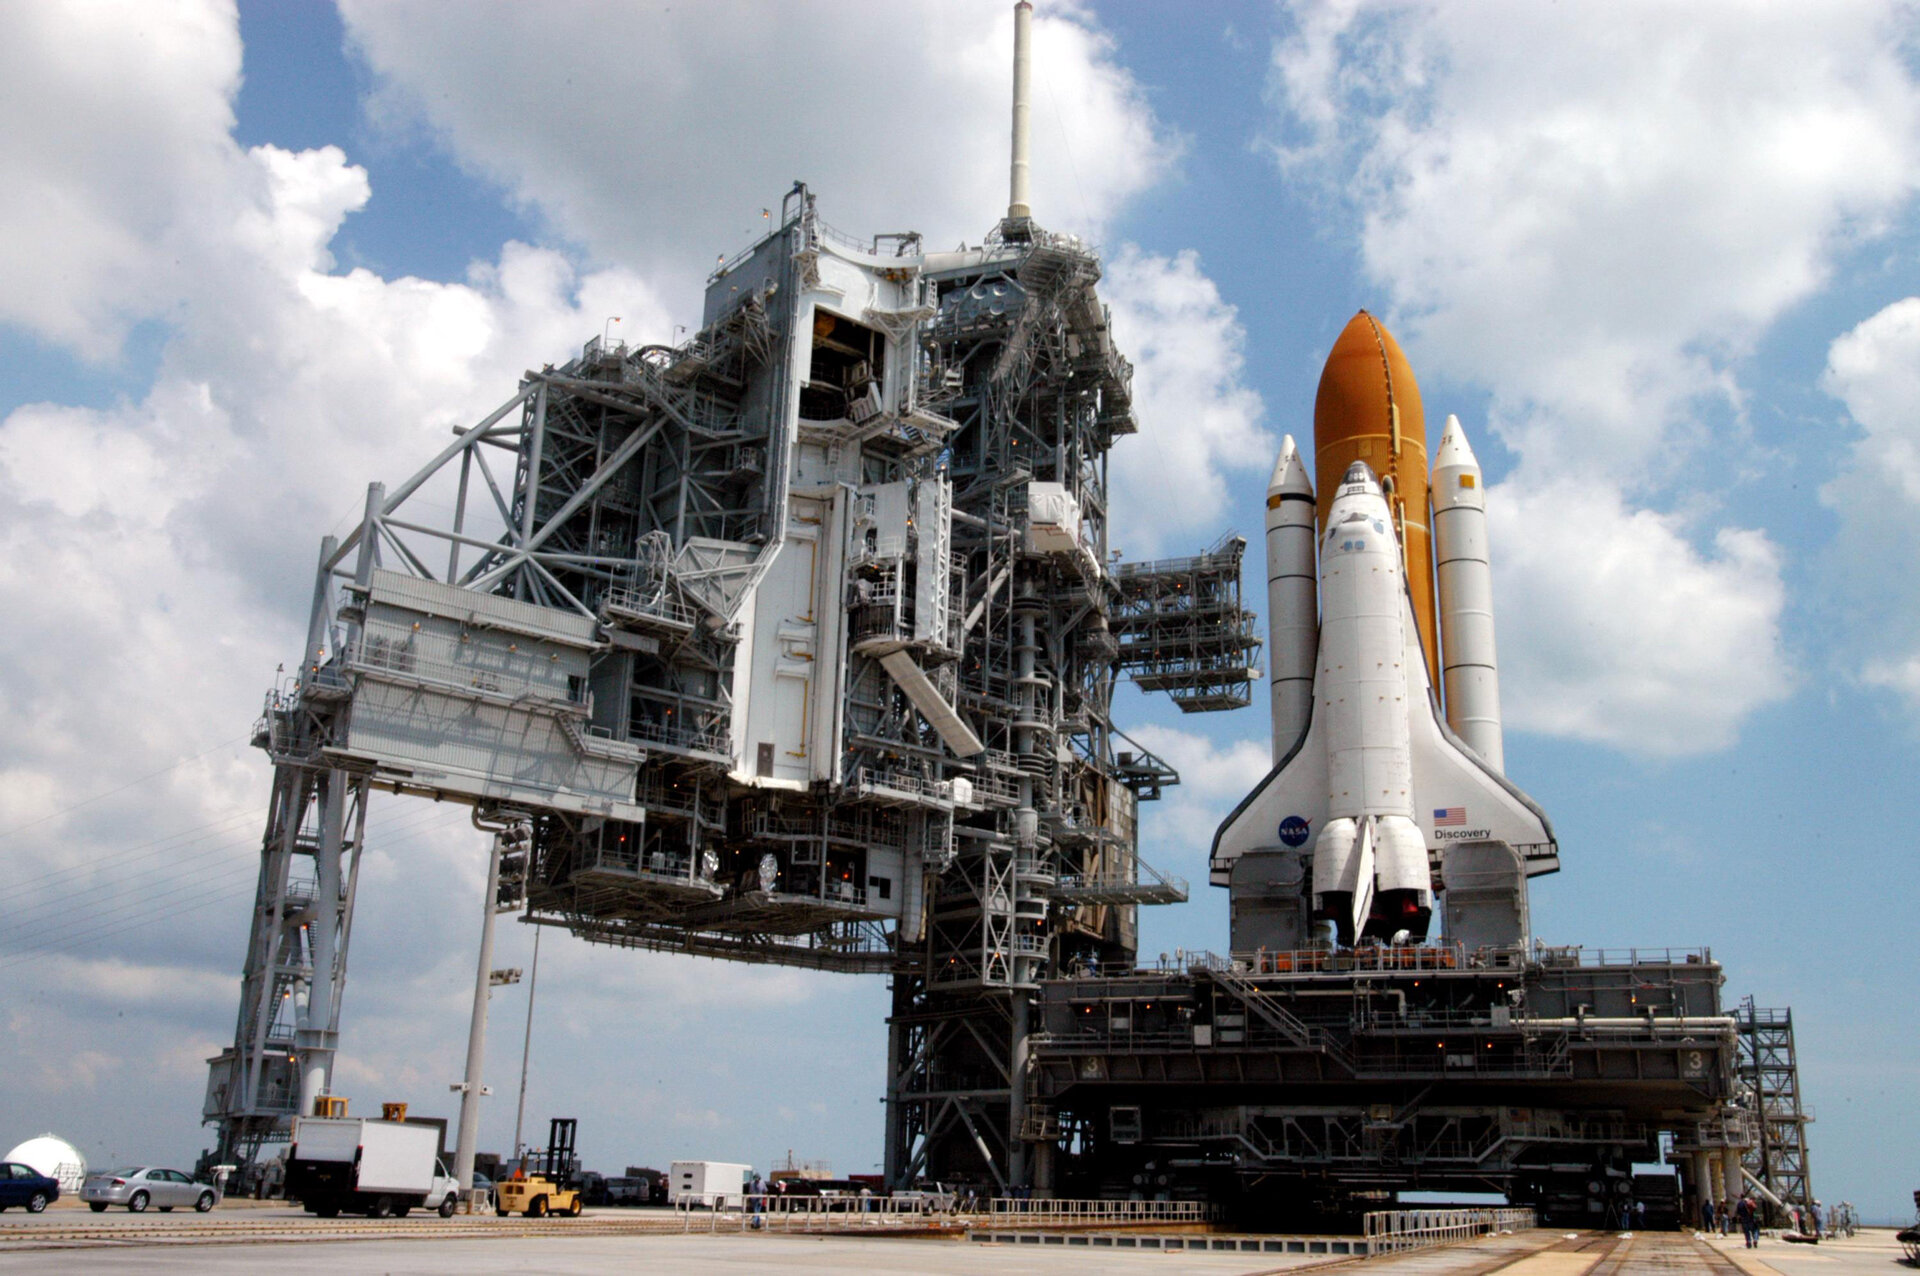 Astrolab launched with Space Shuttle Discovery